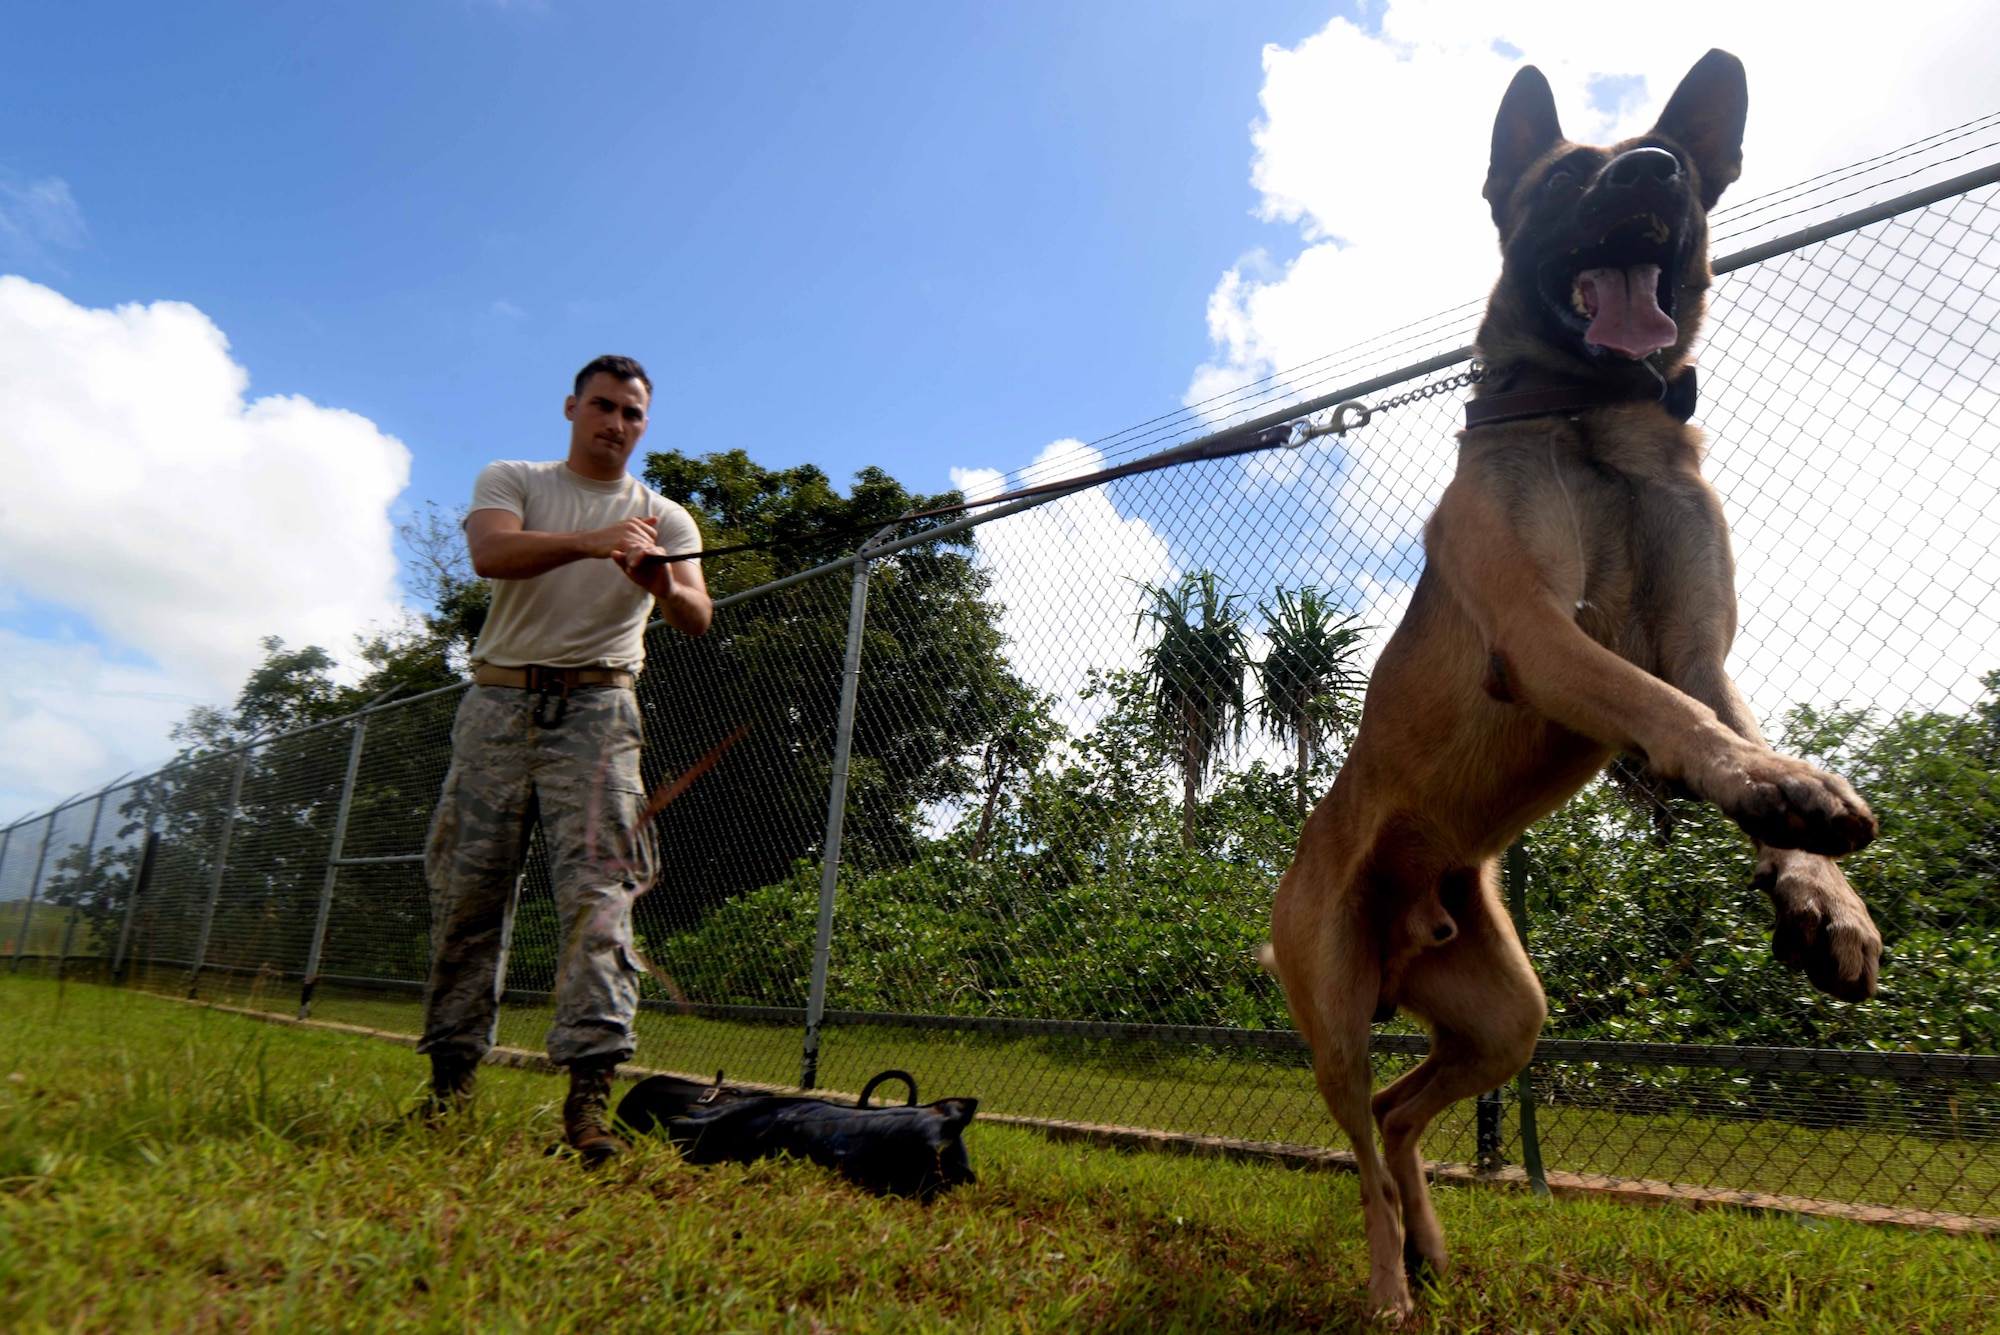 Senior Airman Casey Wheatley, 36th Security Forces Squadron dog handler, and his military working dog Ramos conduct patrol training Oct. 28, 2015, at Andersen Air Force Base, Guam. Ramos, a Belgian Malinois, is skilled in both patrol and detection. (U.S. Air Force photo by Airman 1st Class Alexa Ann Henderson/Released)